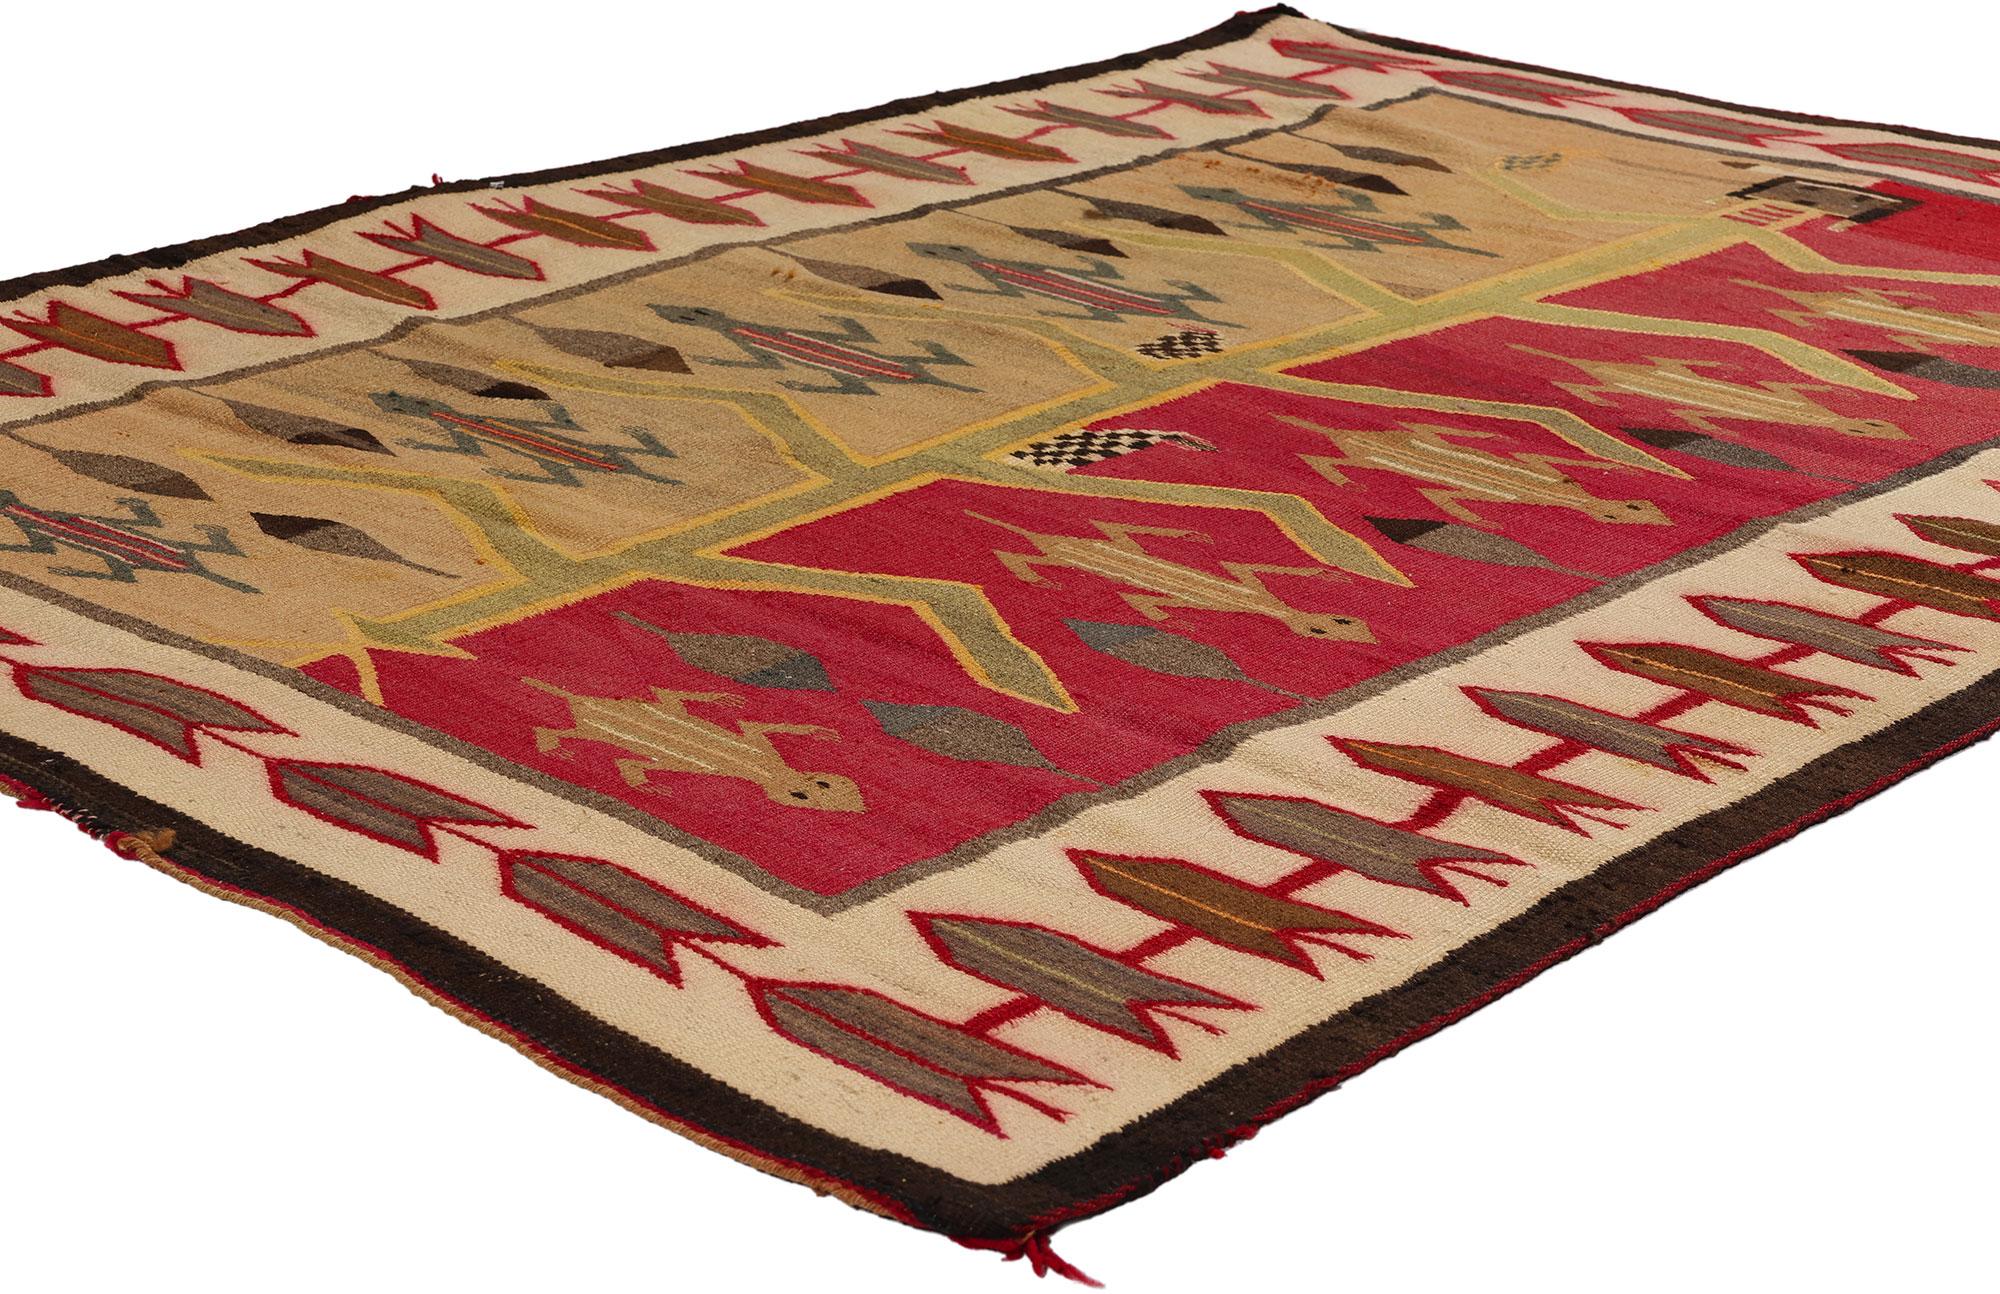 78722 Antique Navajo Tree of Life Pictorial Rug, 03'11 x 05'03. A Navajo Tree of Life Pictorial Yei rug is a type of traditional Navajo rug that incorporates imagery of the Tree of Life along with figures representing Yei, which are spiritual beings